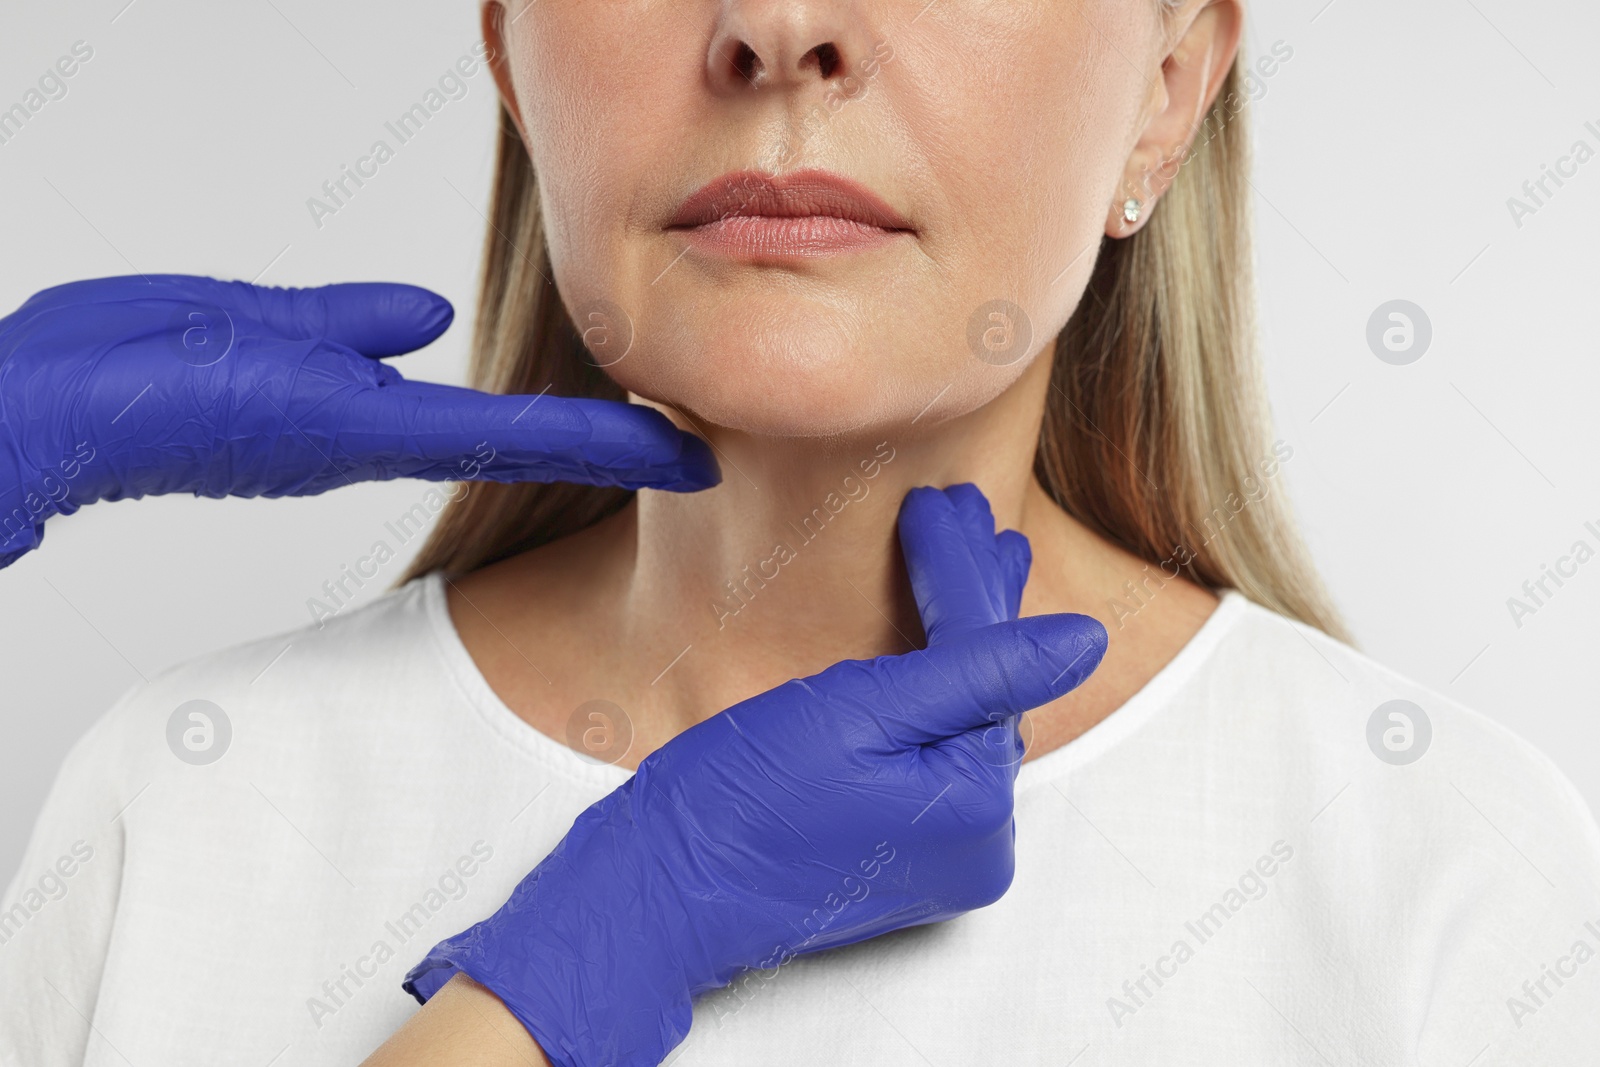 Photo of Endocrinologist examining thyroid gland of patient on light grey background, closeup